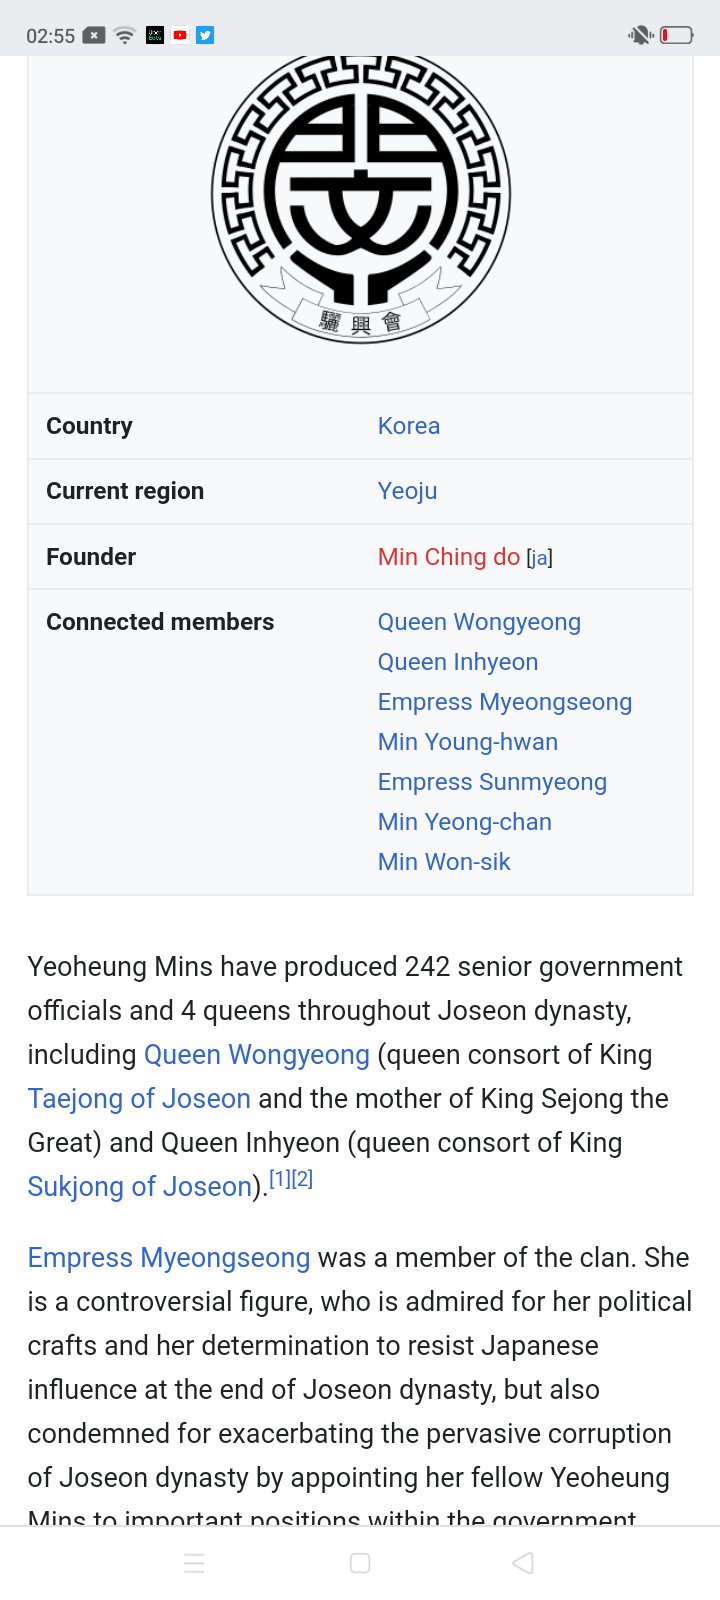 Milenna On Twitter Nothing To Brag About But Imho Many Armys Have No Idea Yoongi Tae And Seokjin Come From Old Korean Royal Families Min Clan In The Joseon Empire Has The last empress;myeong seong hwanghu;empress myung sung;the lost empire;empress myeong seong;명성왕후; korean royal families min clan